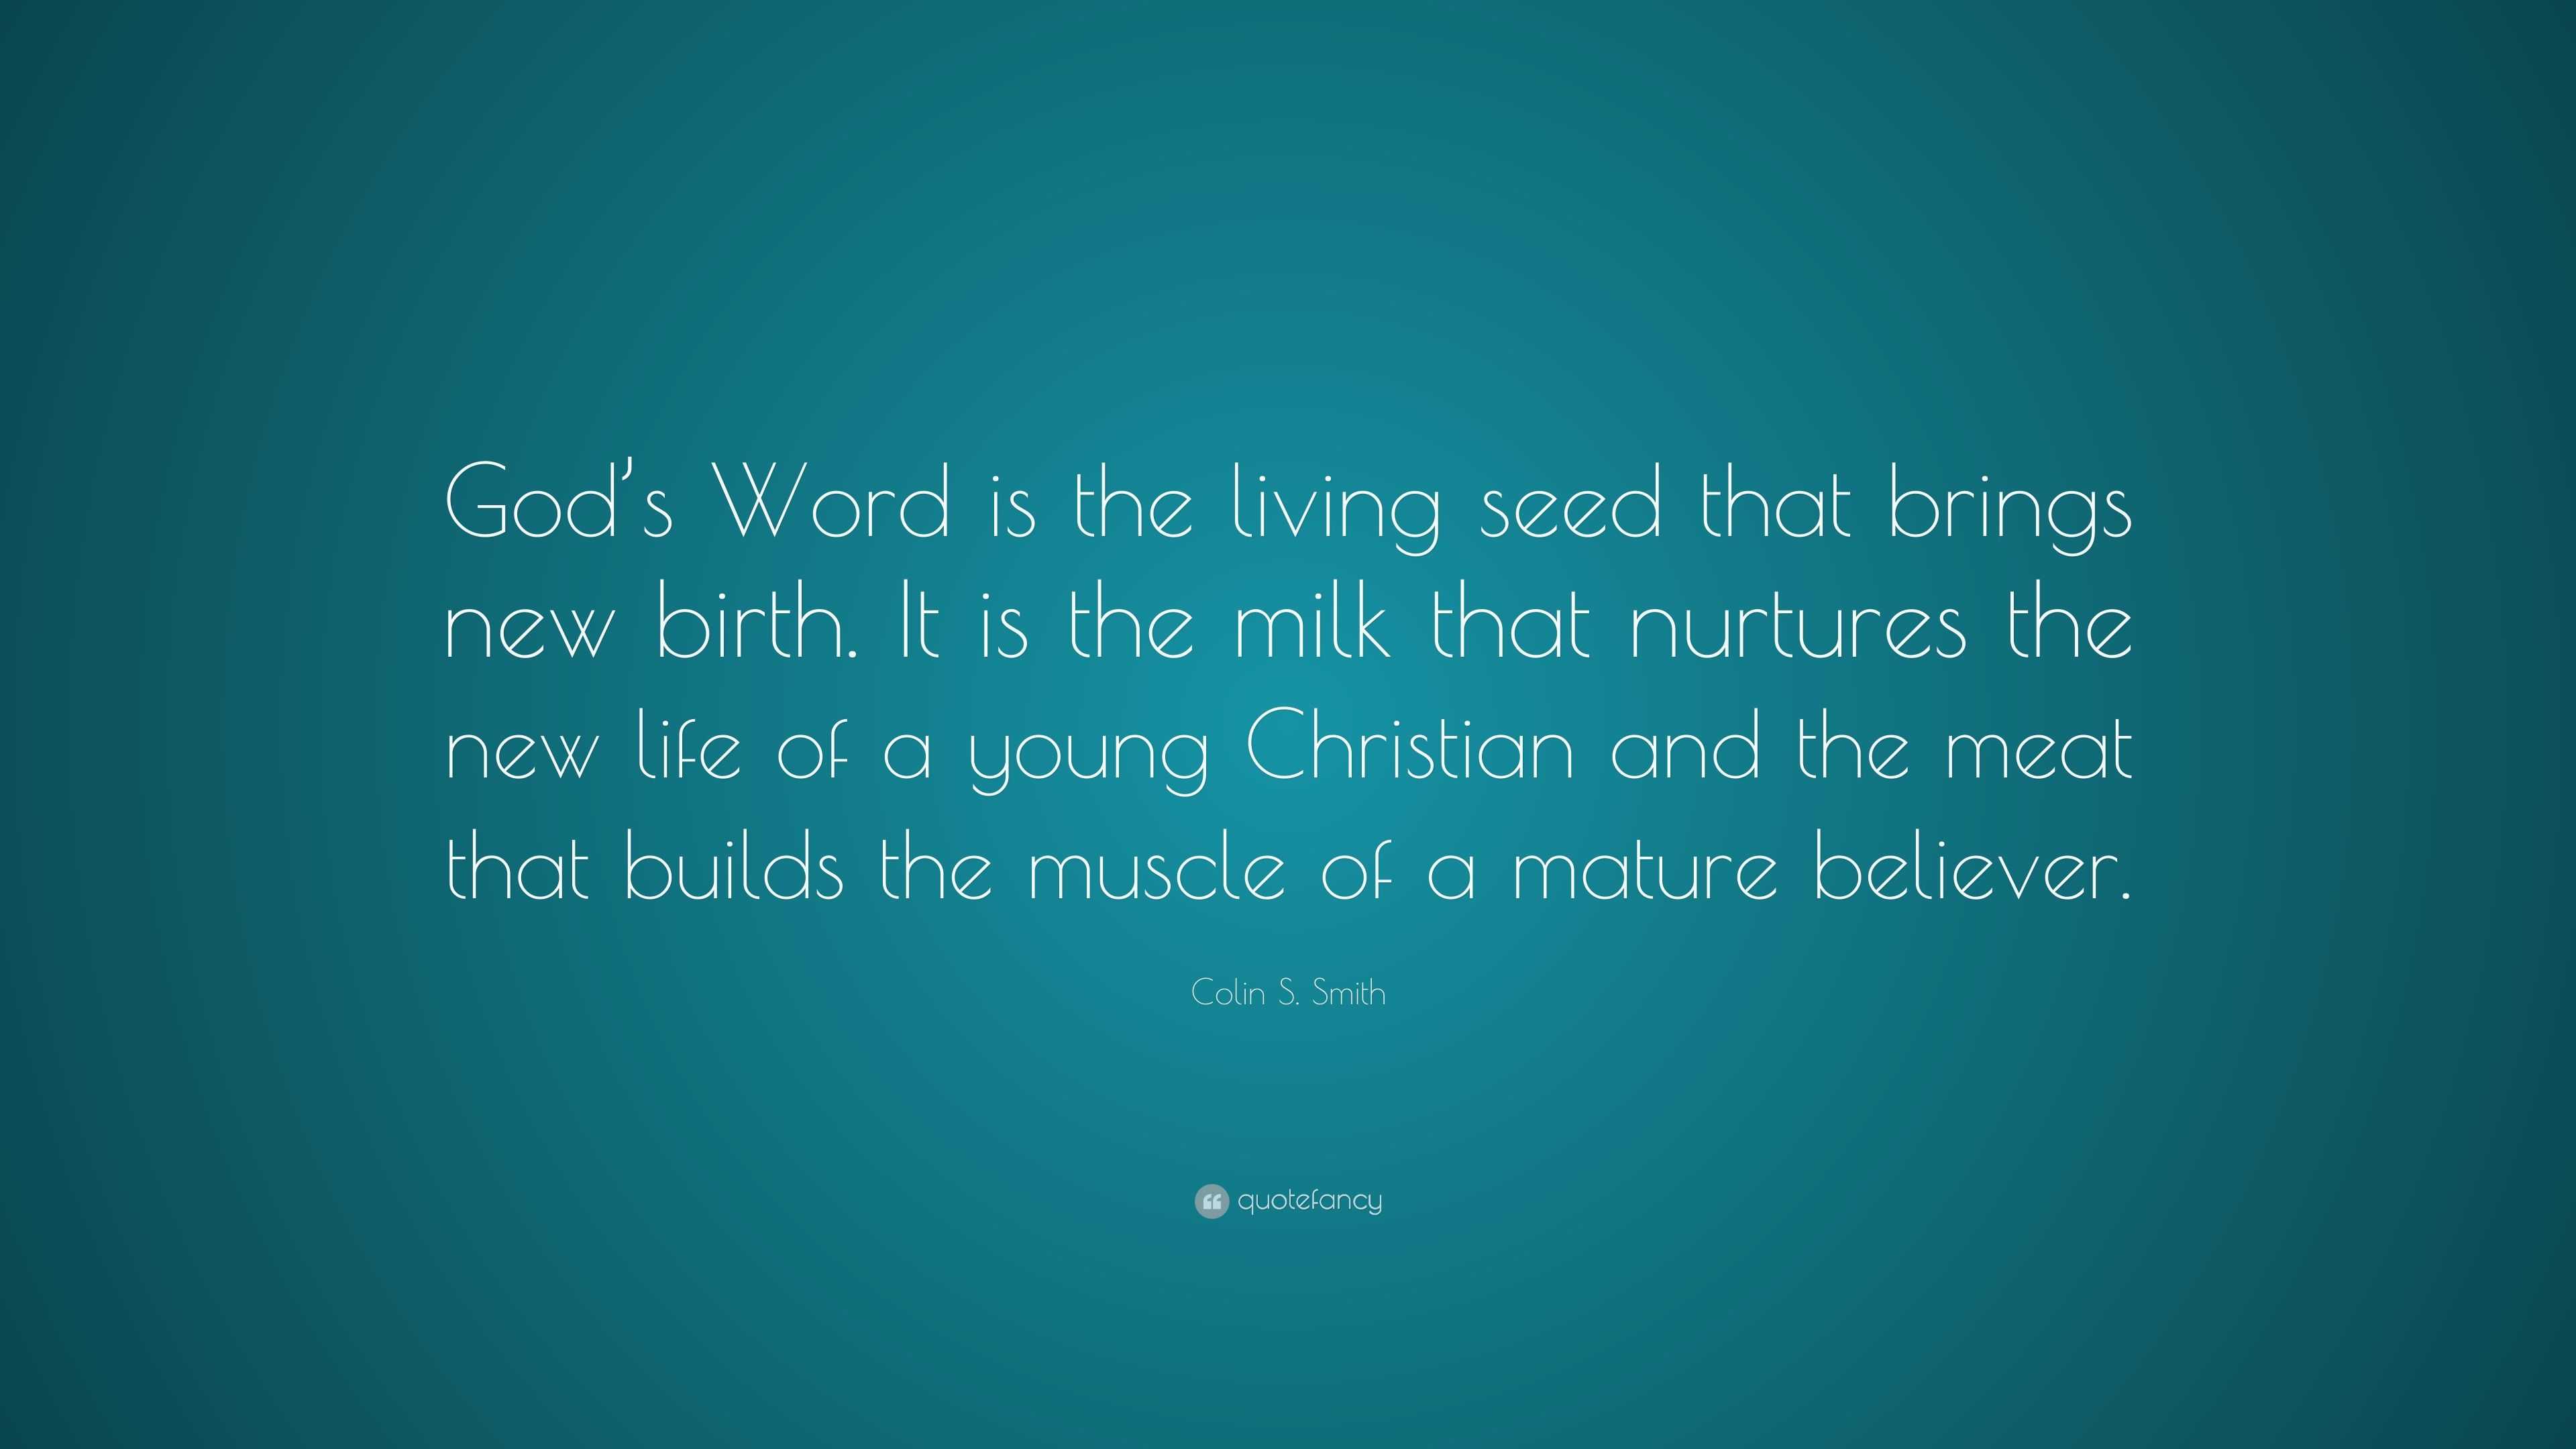 Colin S Smith Quote “God s Word is the living seed that brings new